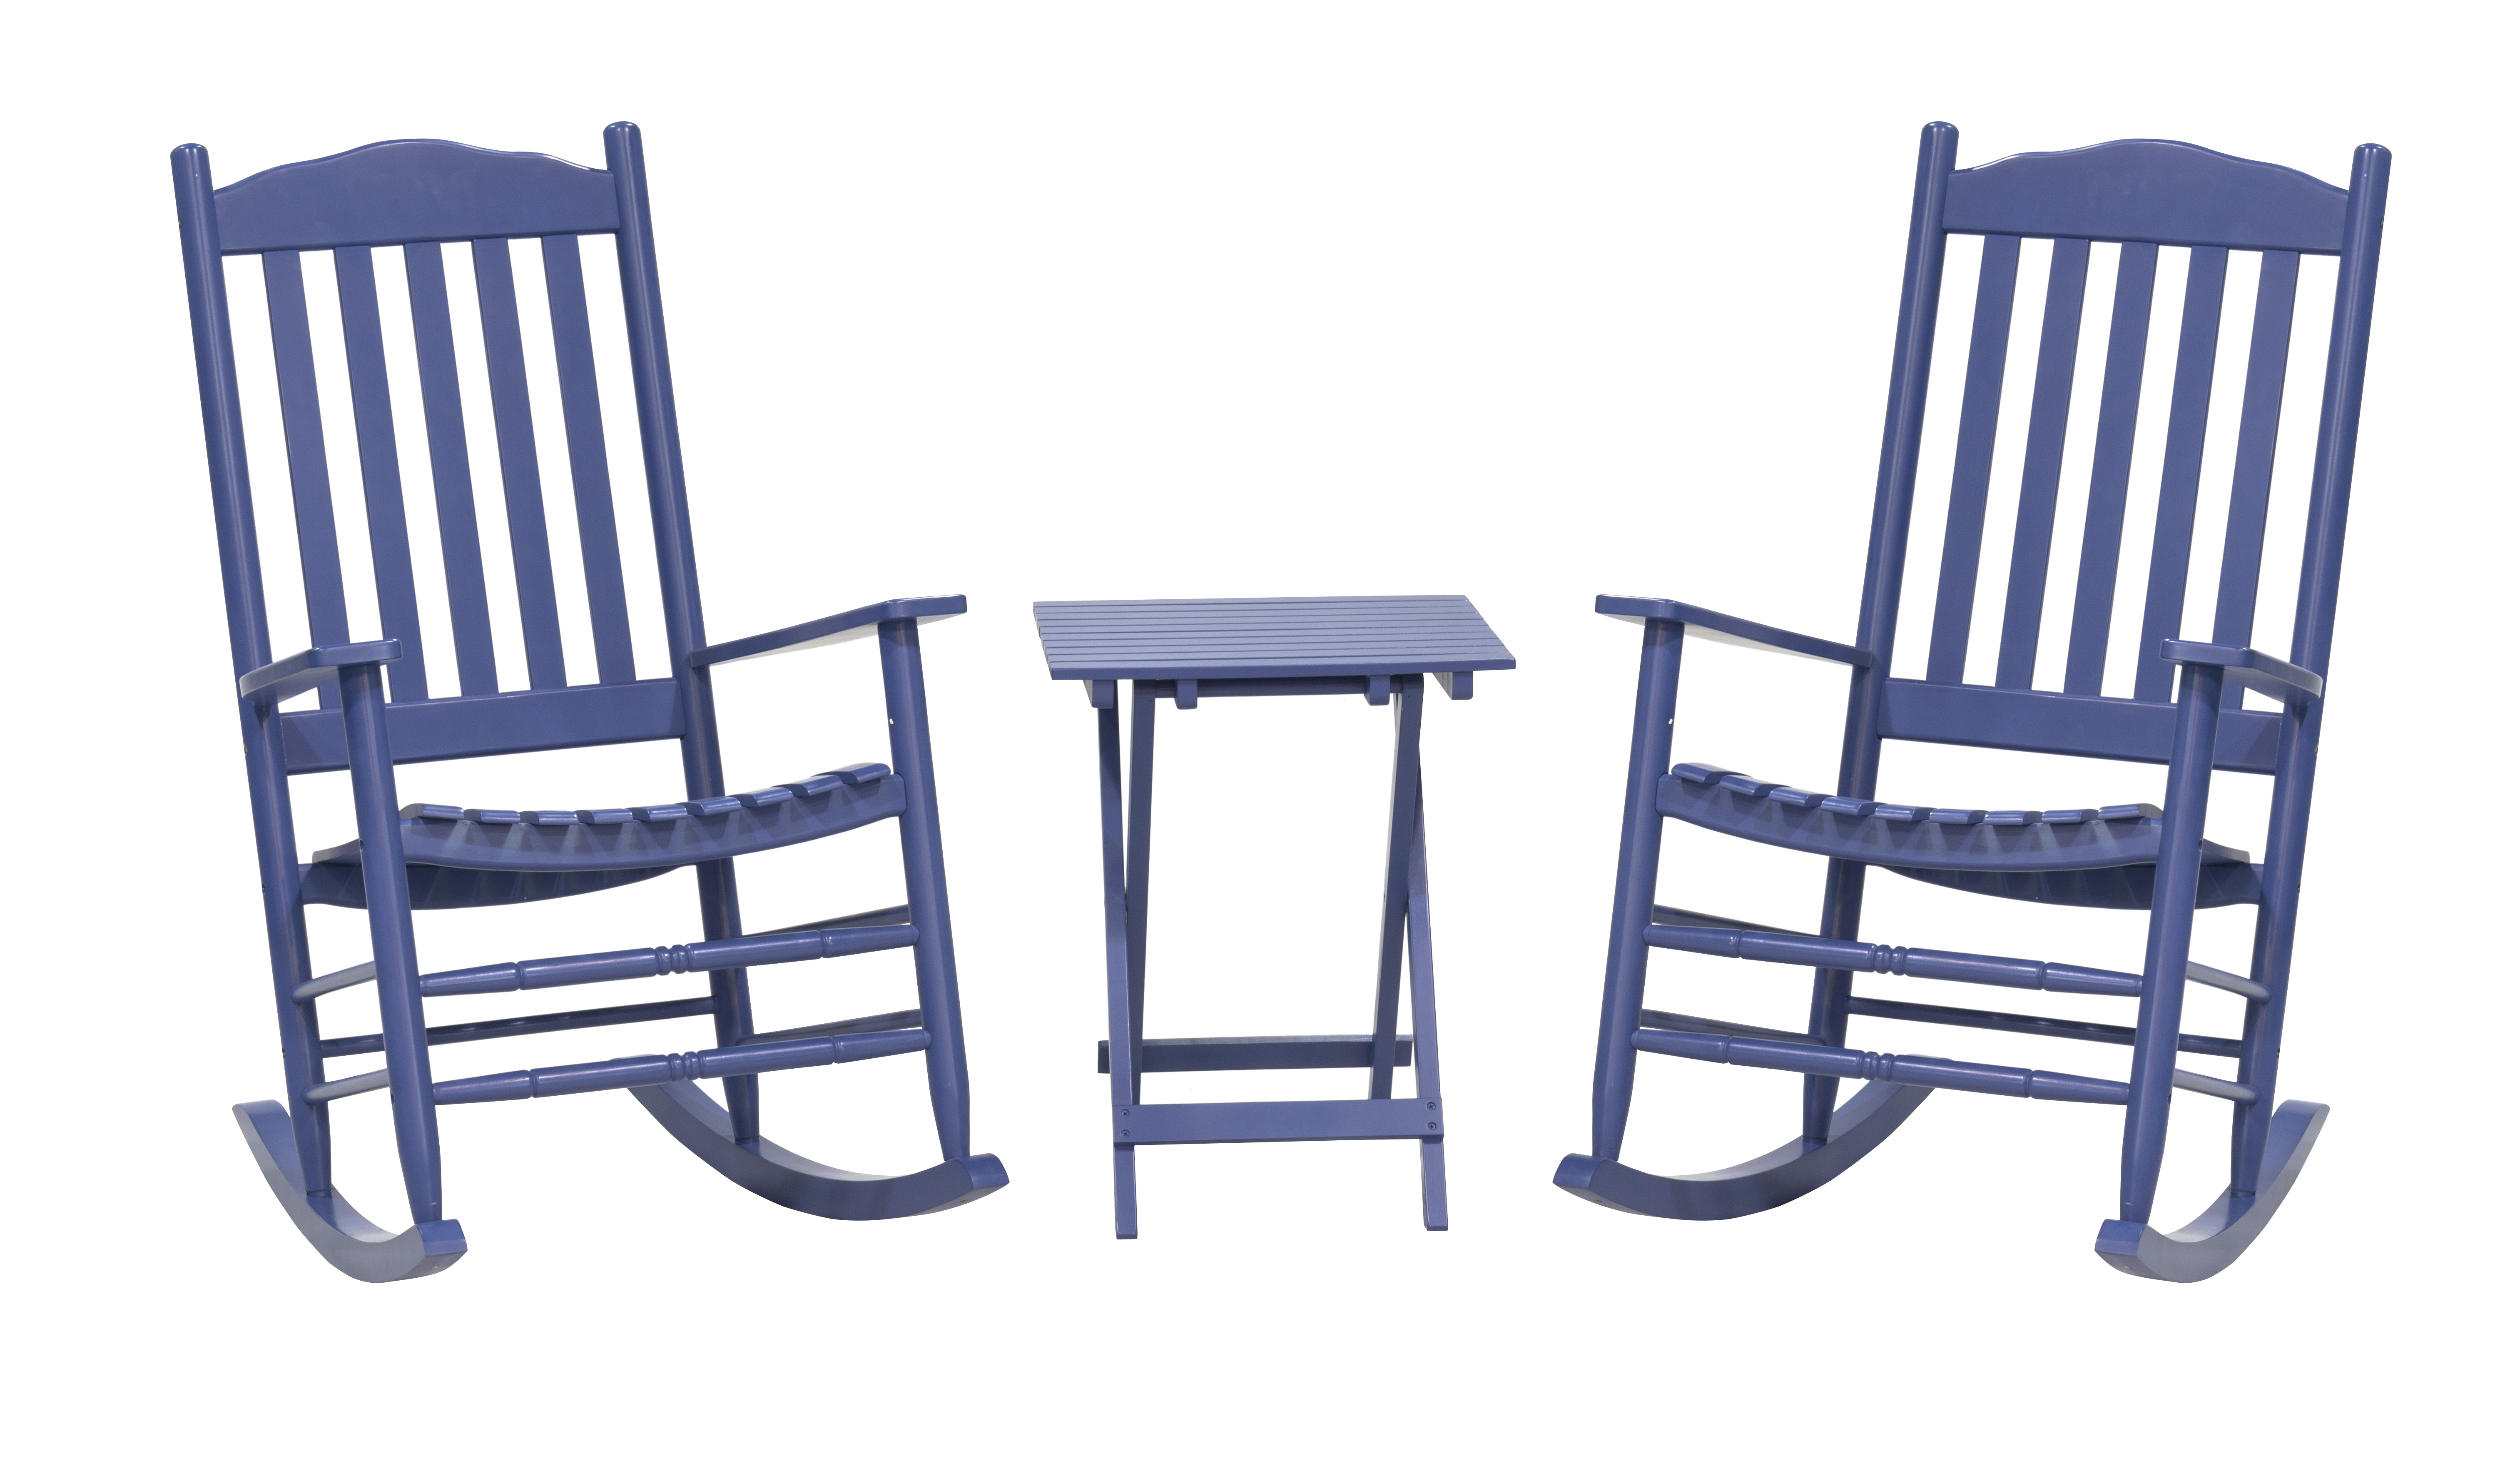 Outdoor Patio Garden Furniture 3-Piece Wood Porch Rocking Chair Set, Weather Resistant Finish,2 Rocking Chairs and 1 Side Table-Blue - image 2 of 11